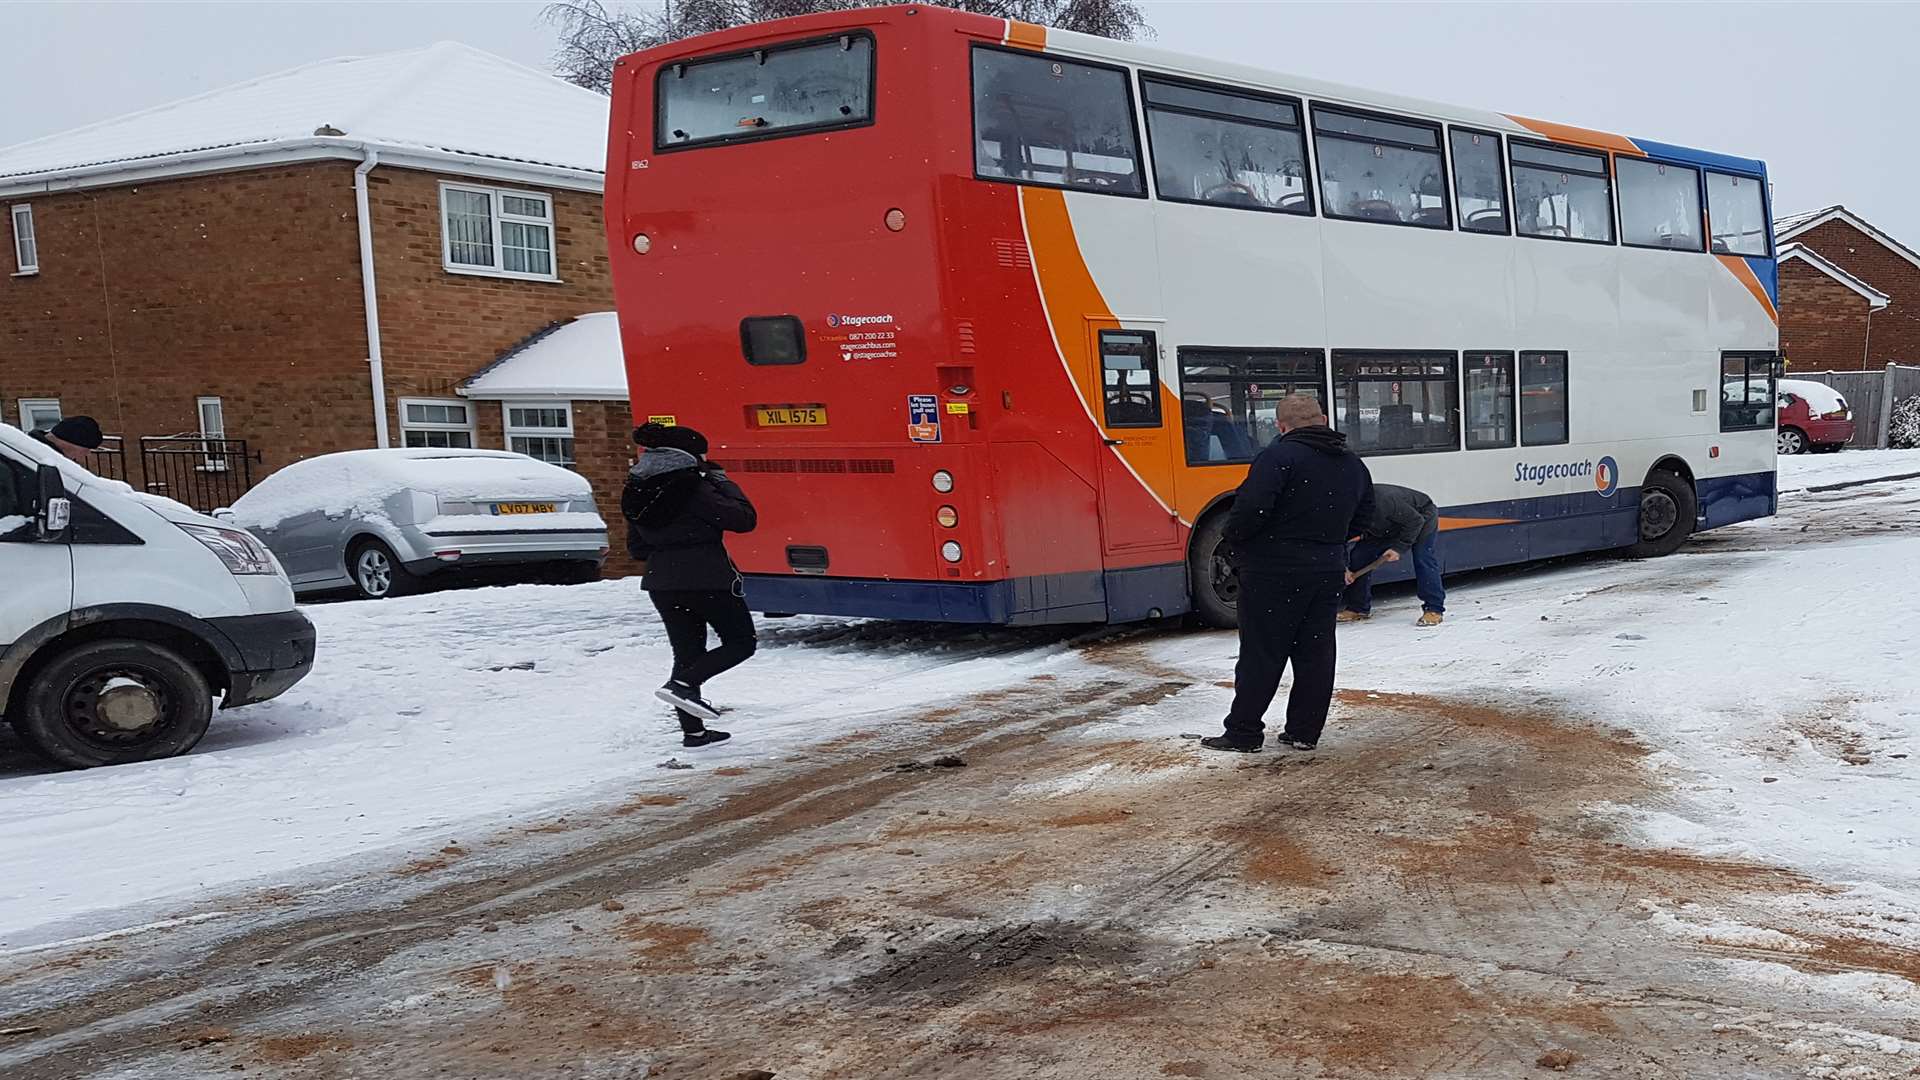 The first bus became stuck just after 10am